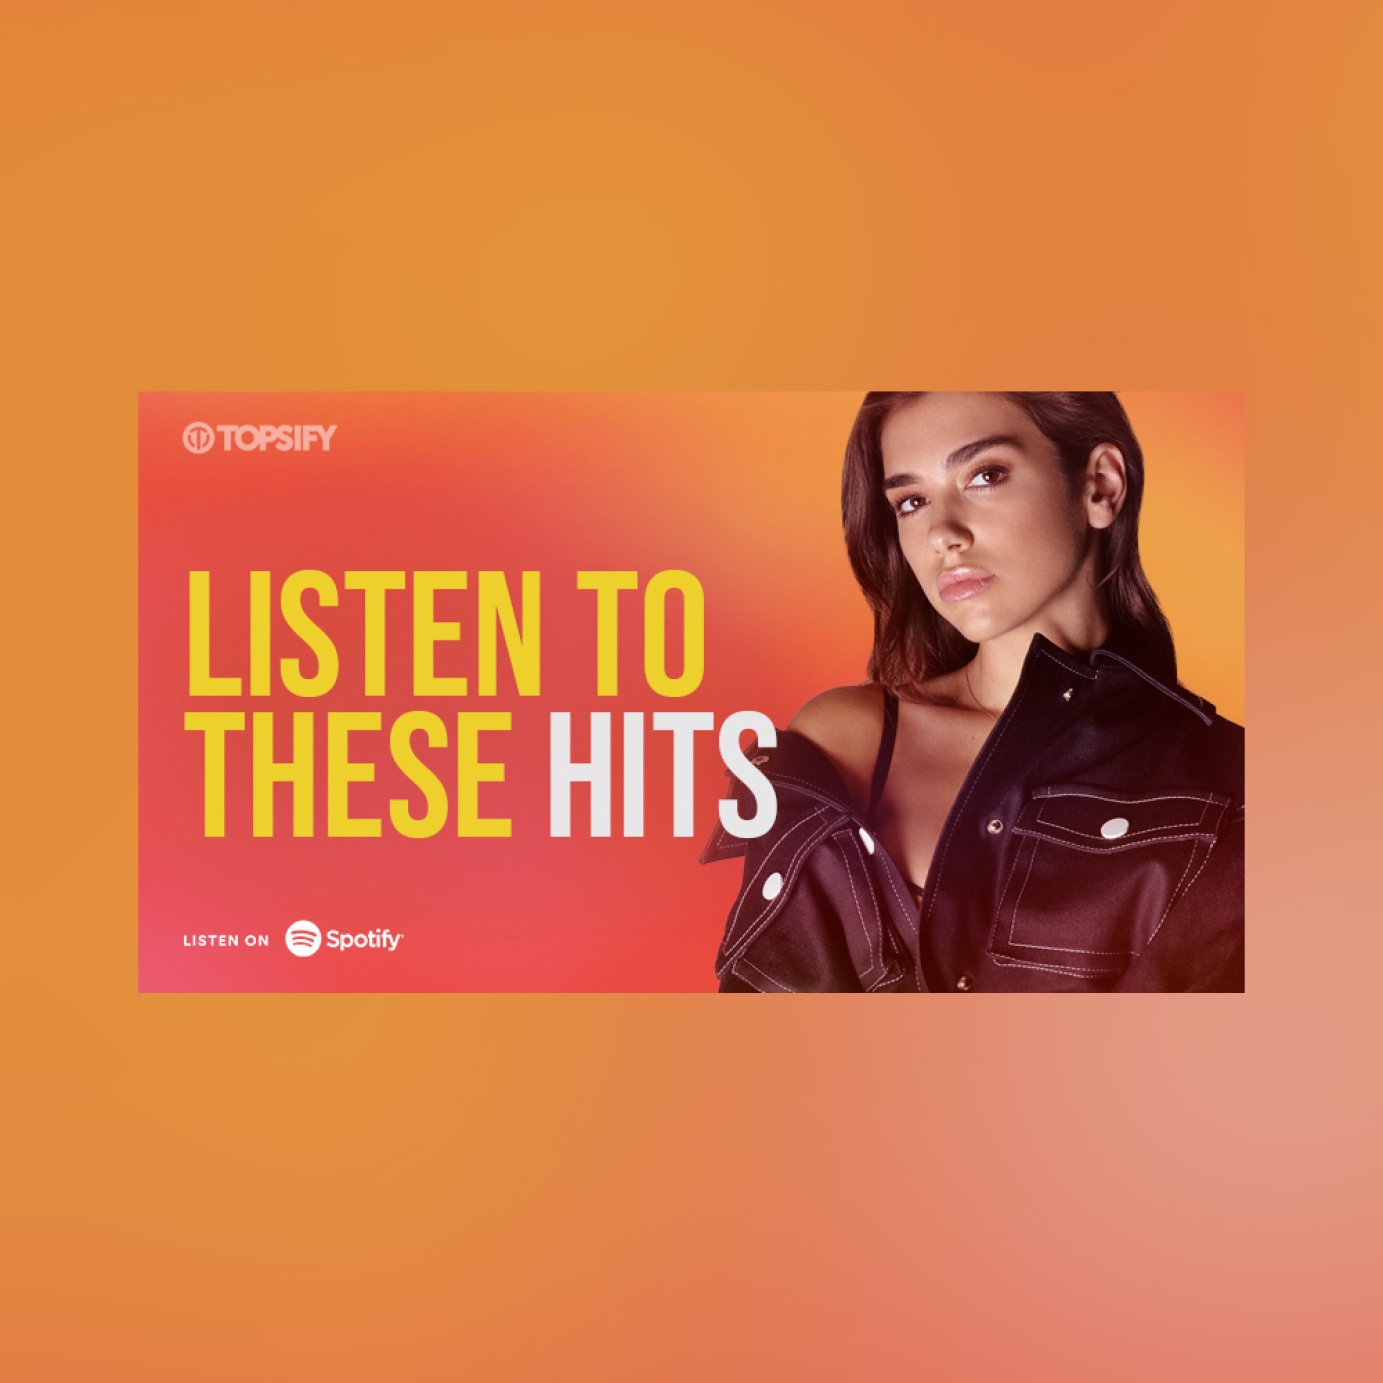 Topsify Romania "Listen to These Hits" Playlist Ad